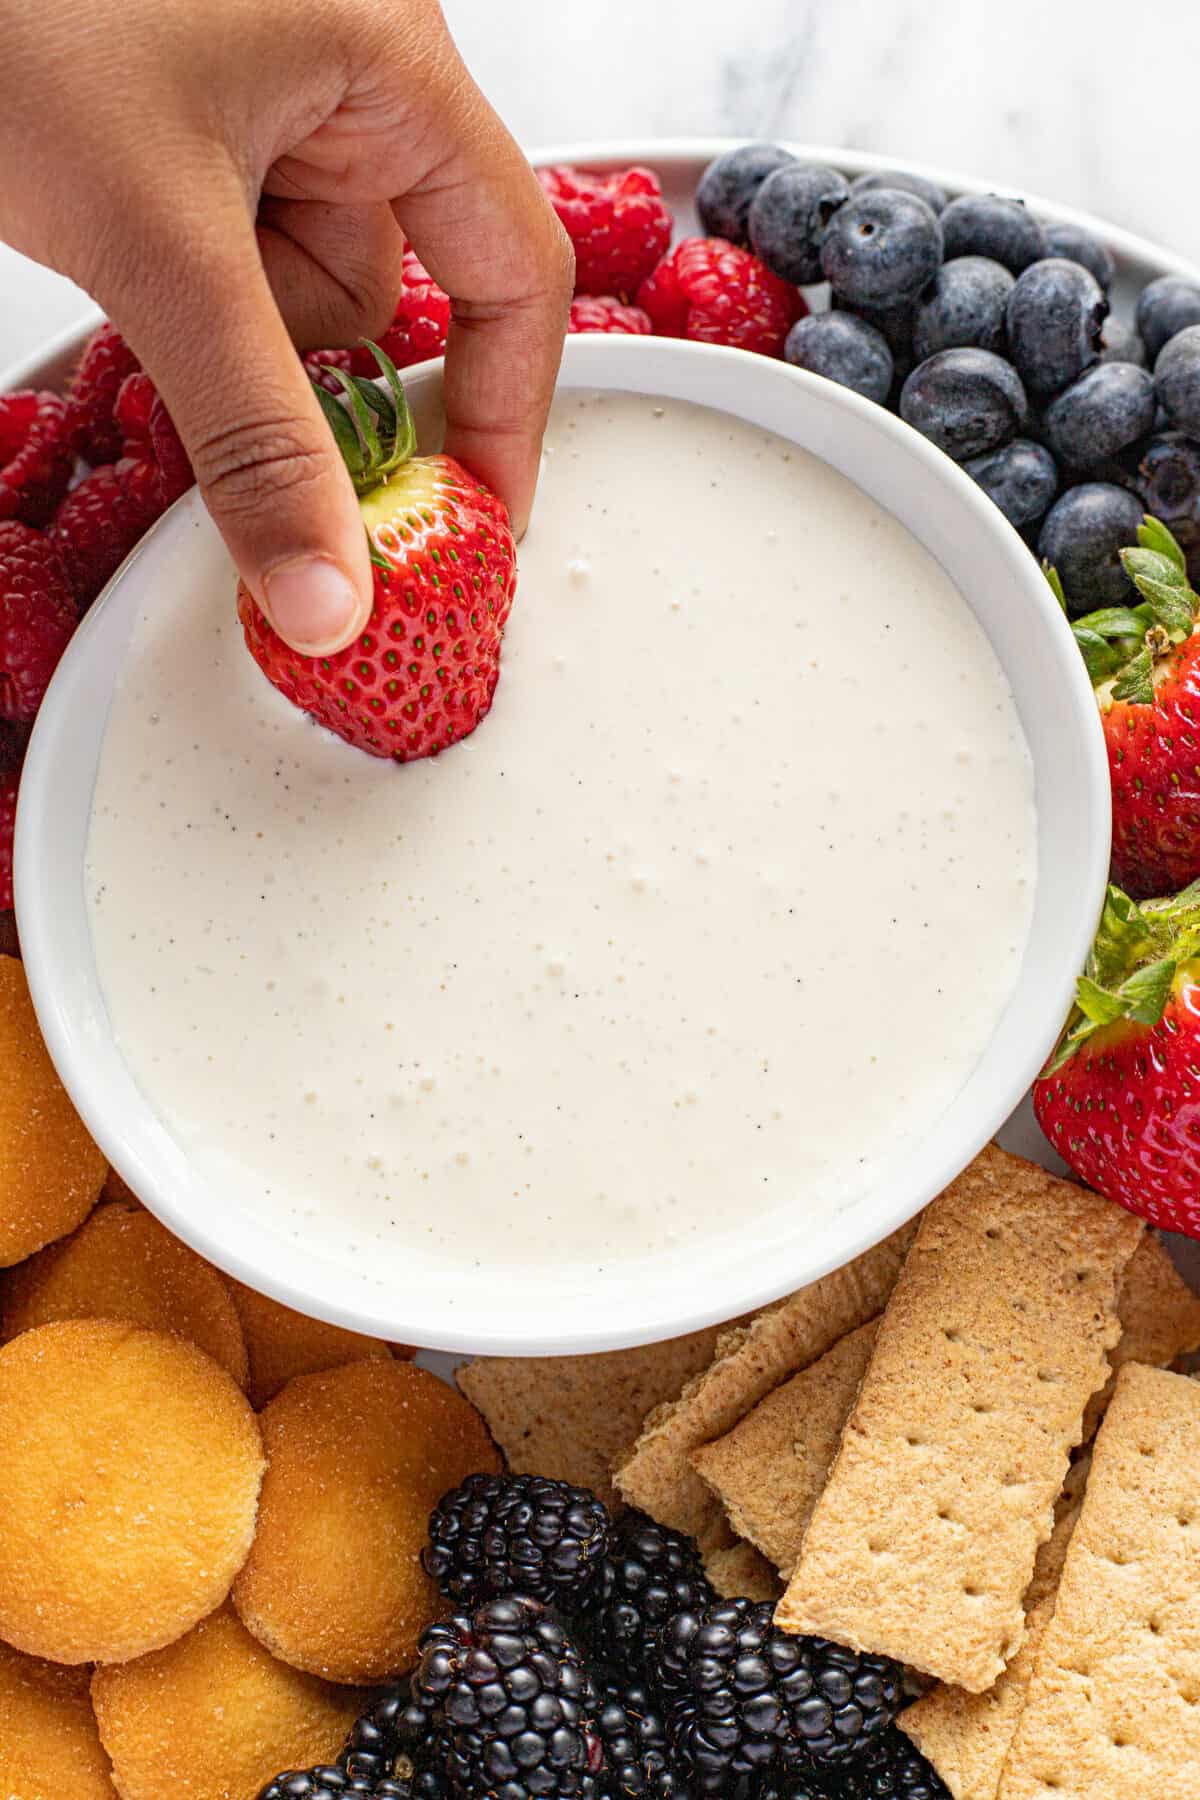 A small hand dipping a strawberry into a bowl of creamy fruit dip.